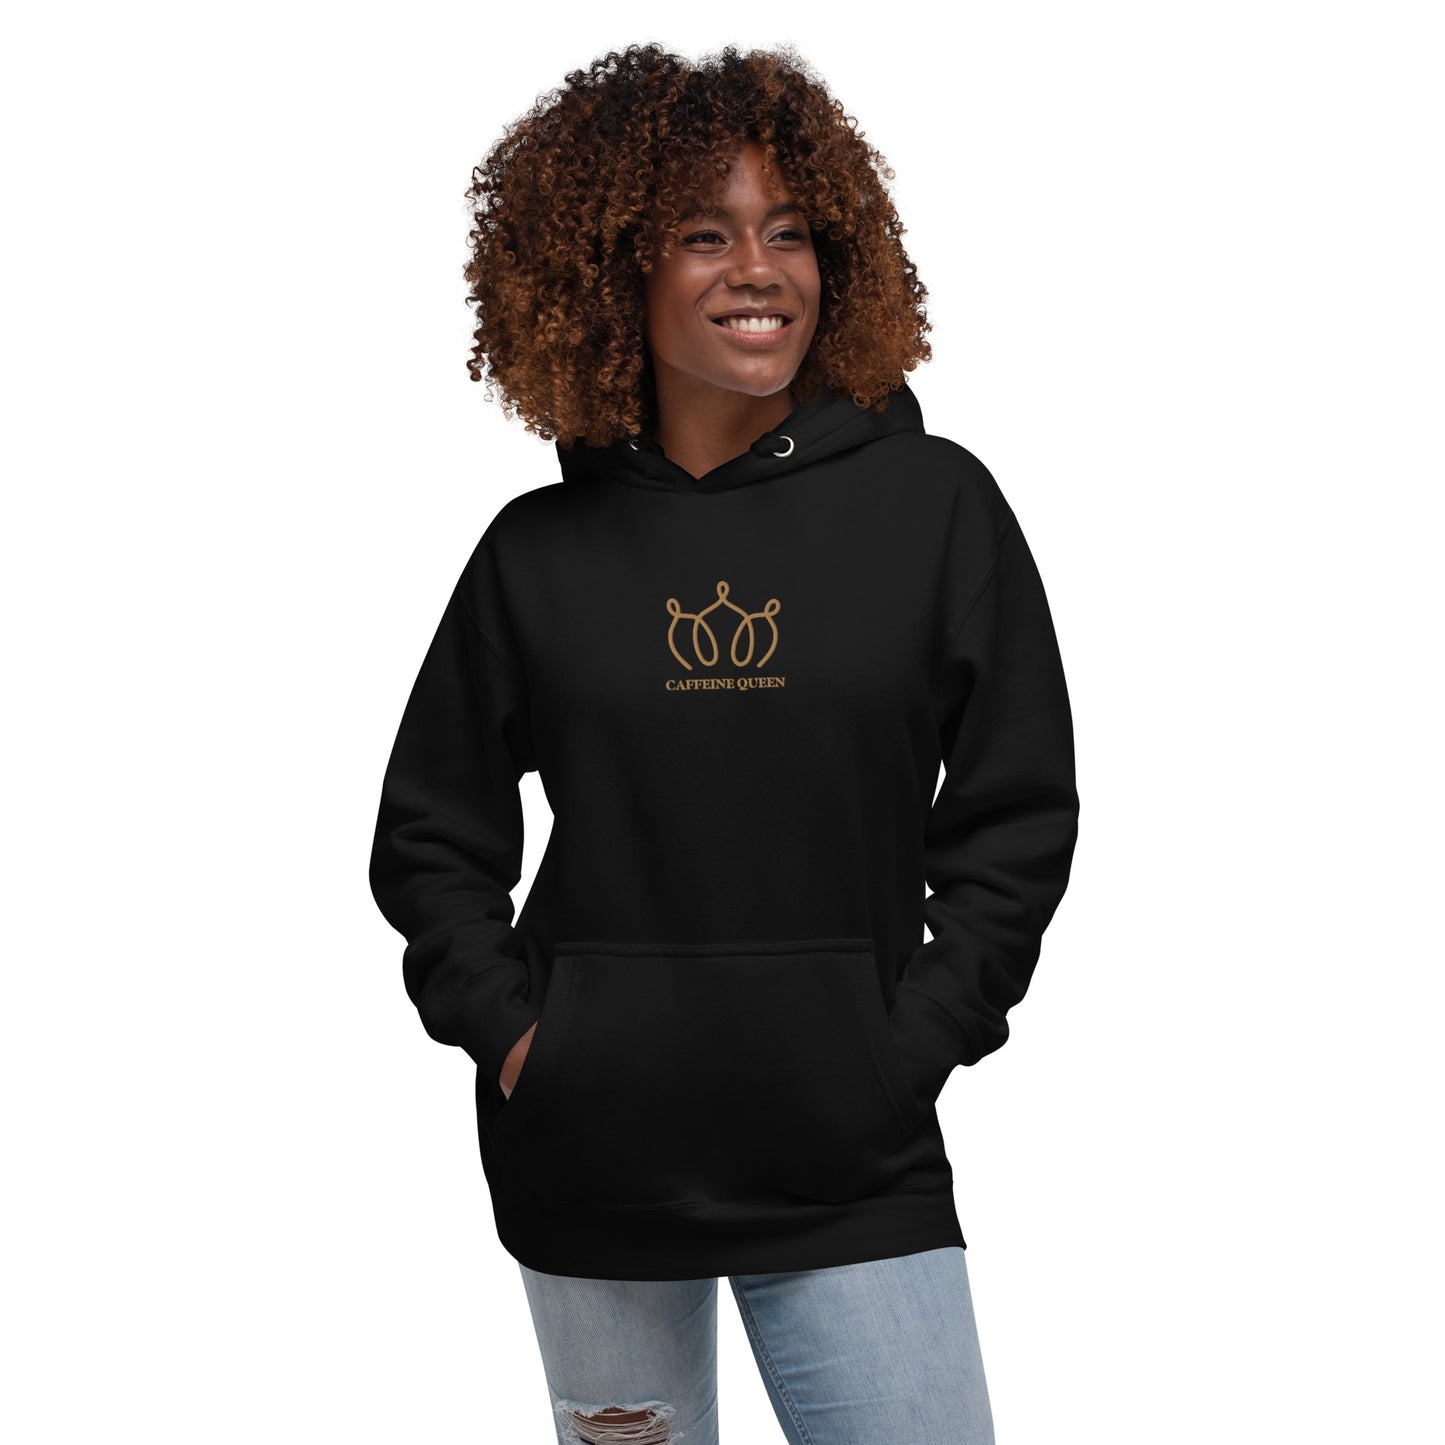 Woman wearing a black hoodie with an embroidered crown and Caffeine Queen text on the front.